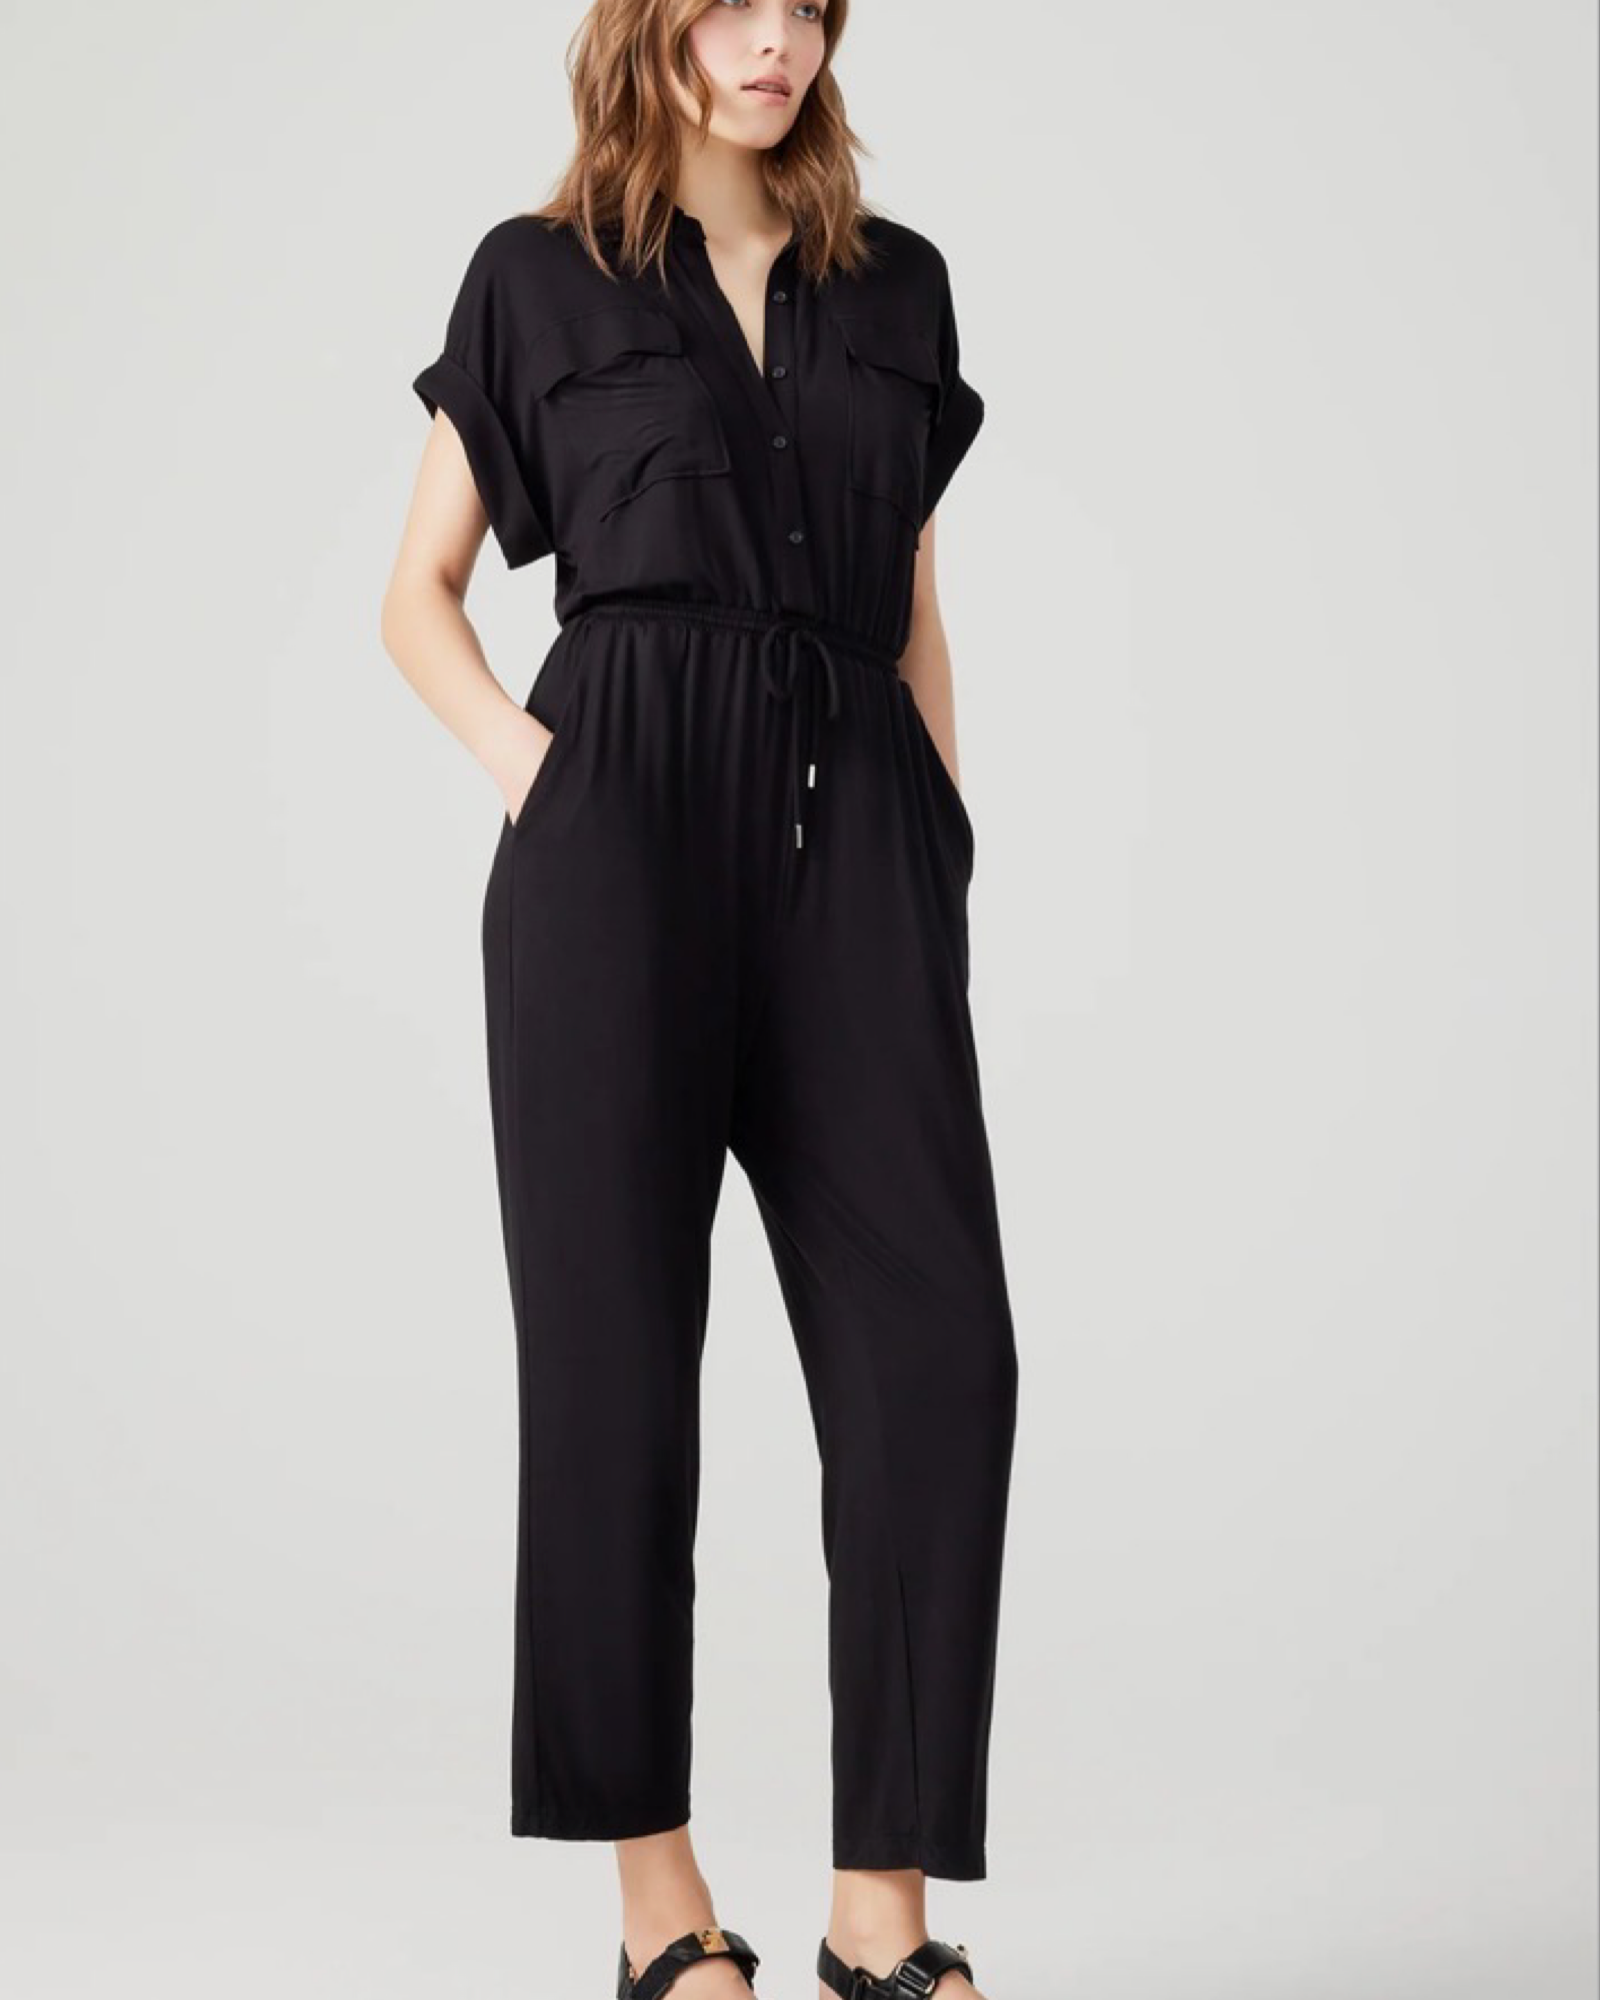 Stylish Jumpsuits in Canada